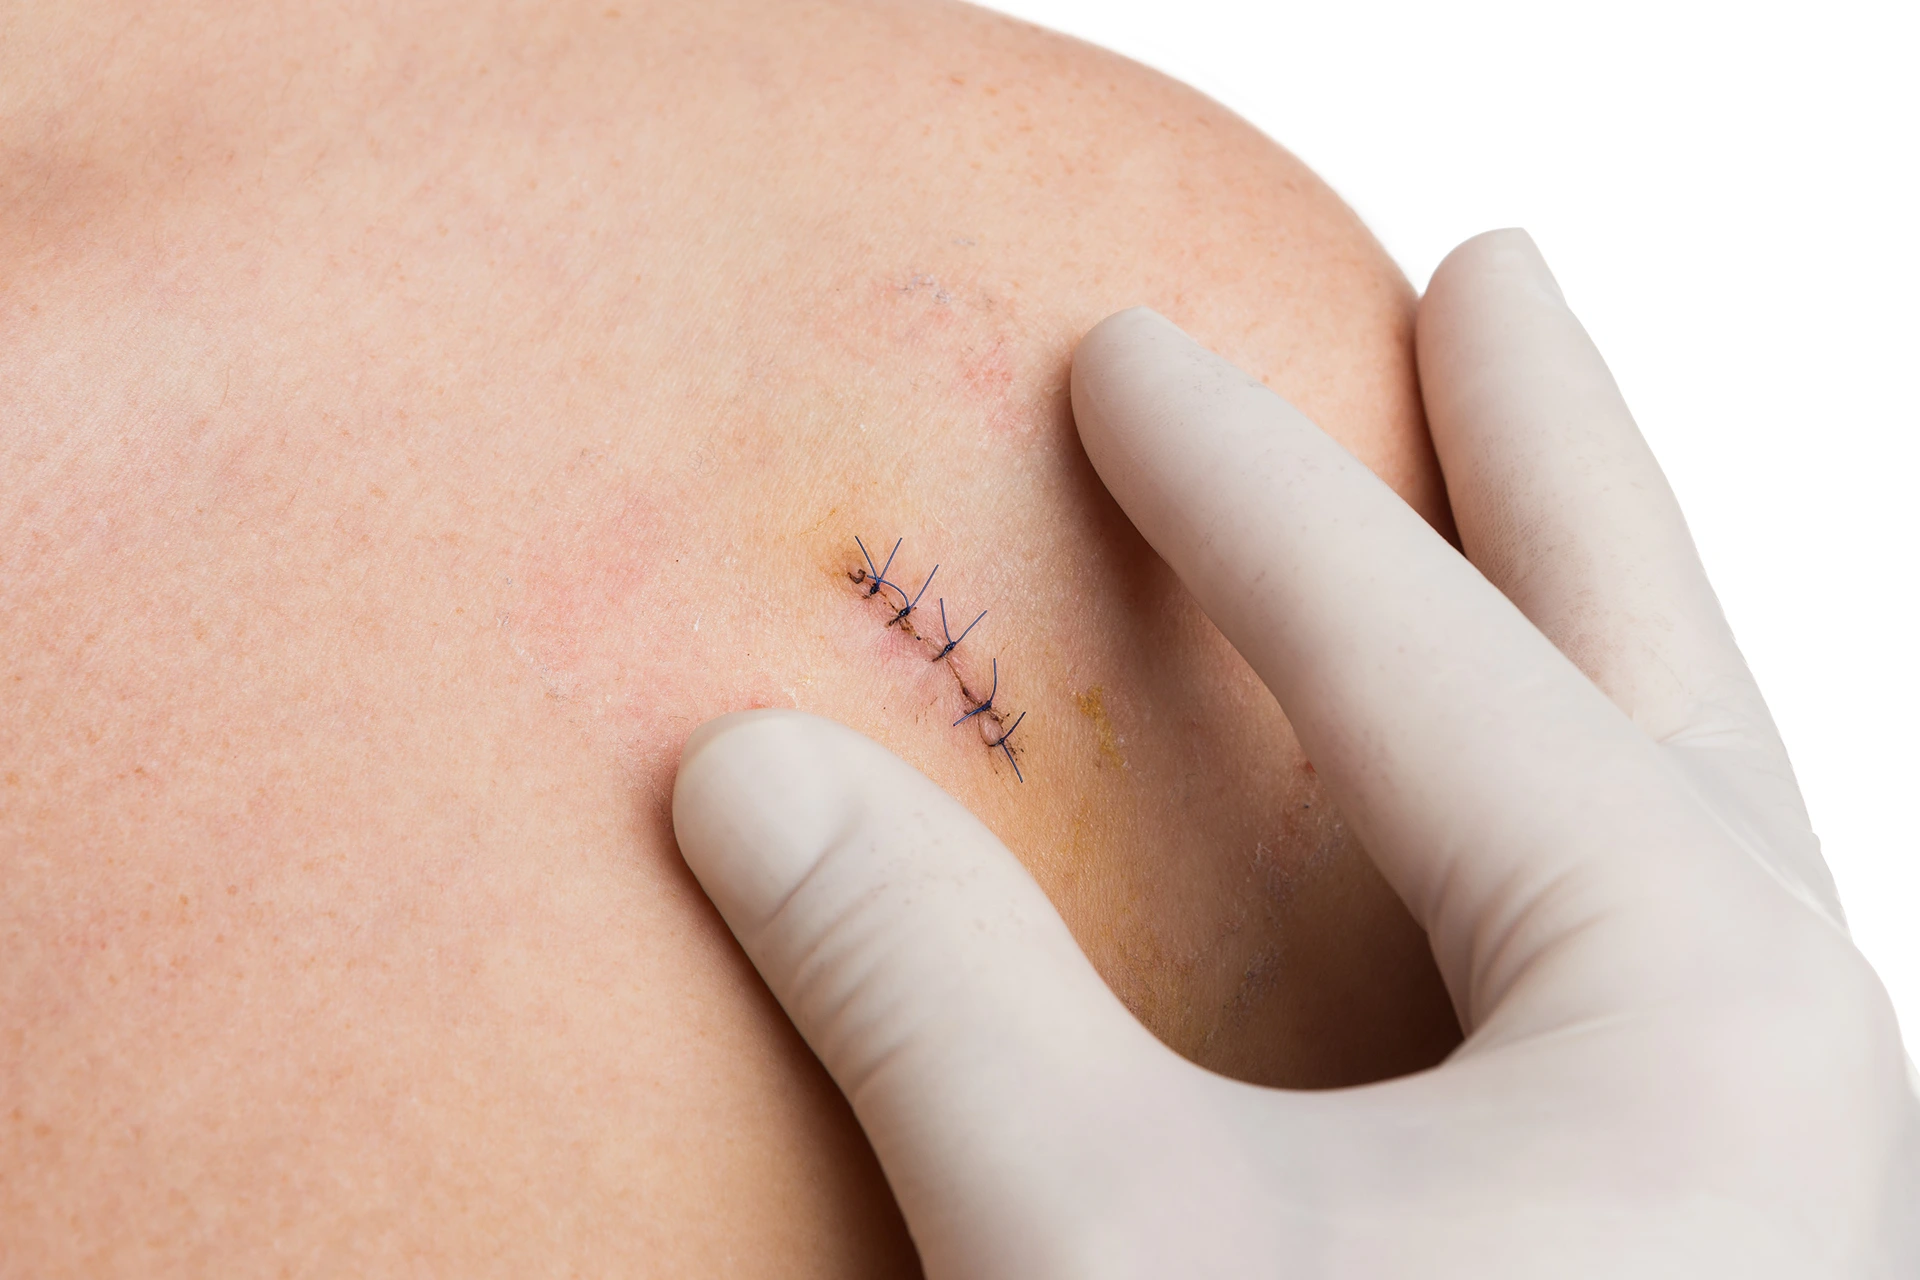 skin graft care after mohs surgery